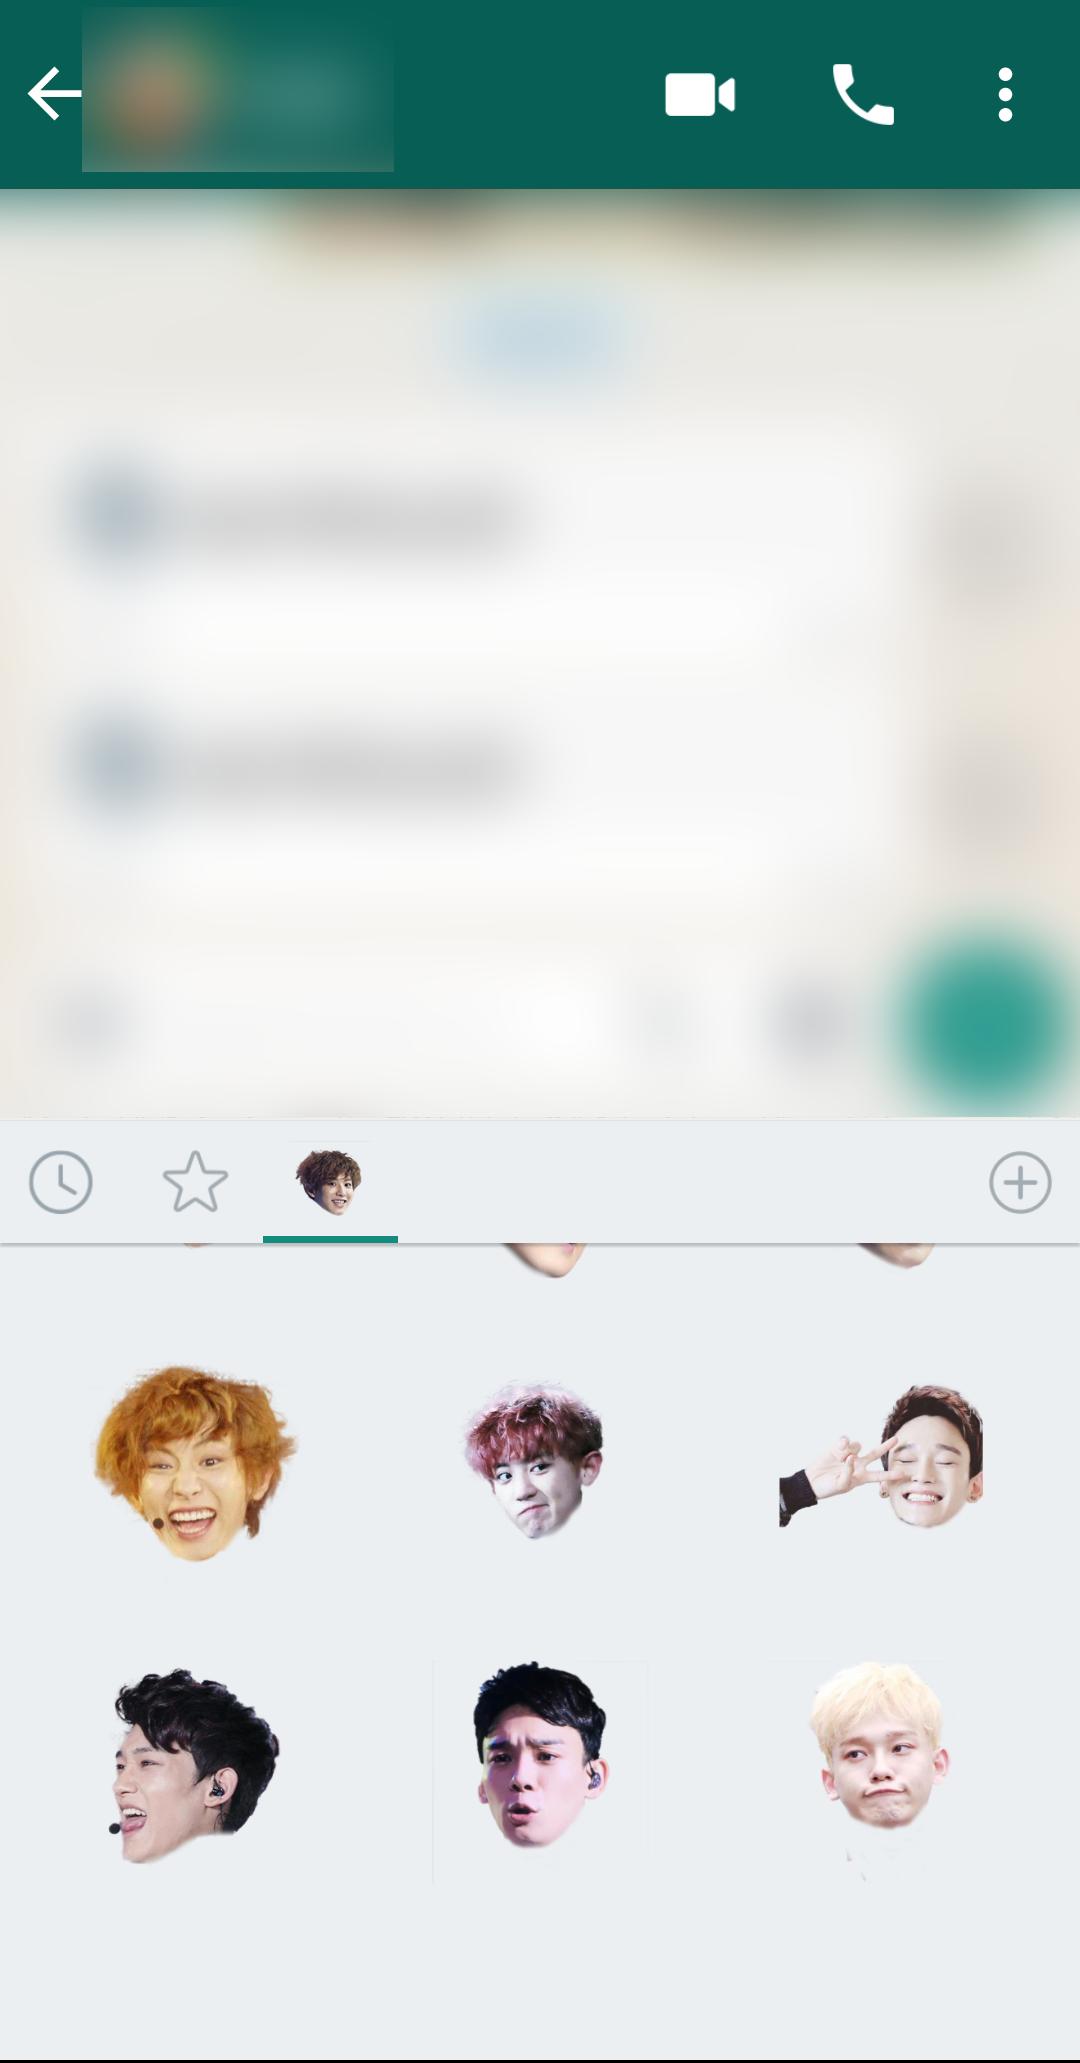 Exo Whatsapp Sticker Kpop For Android Apk Download